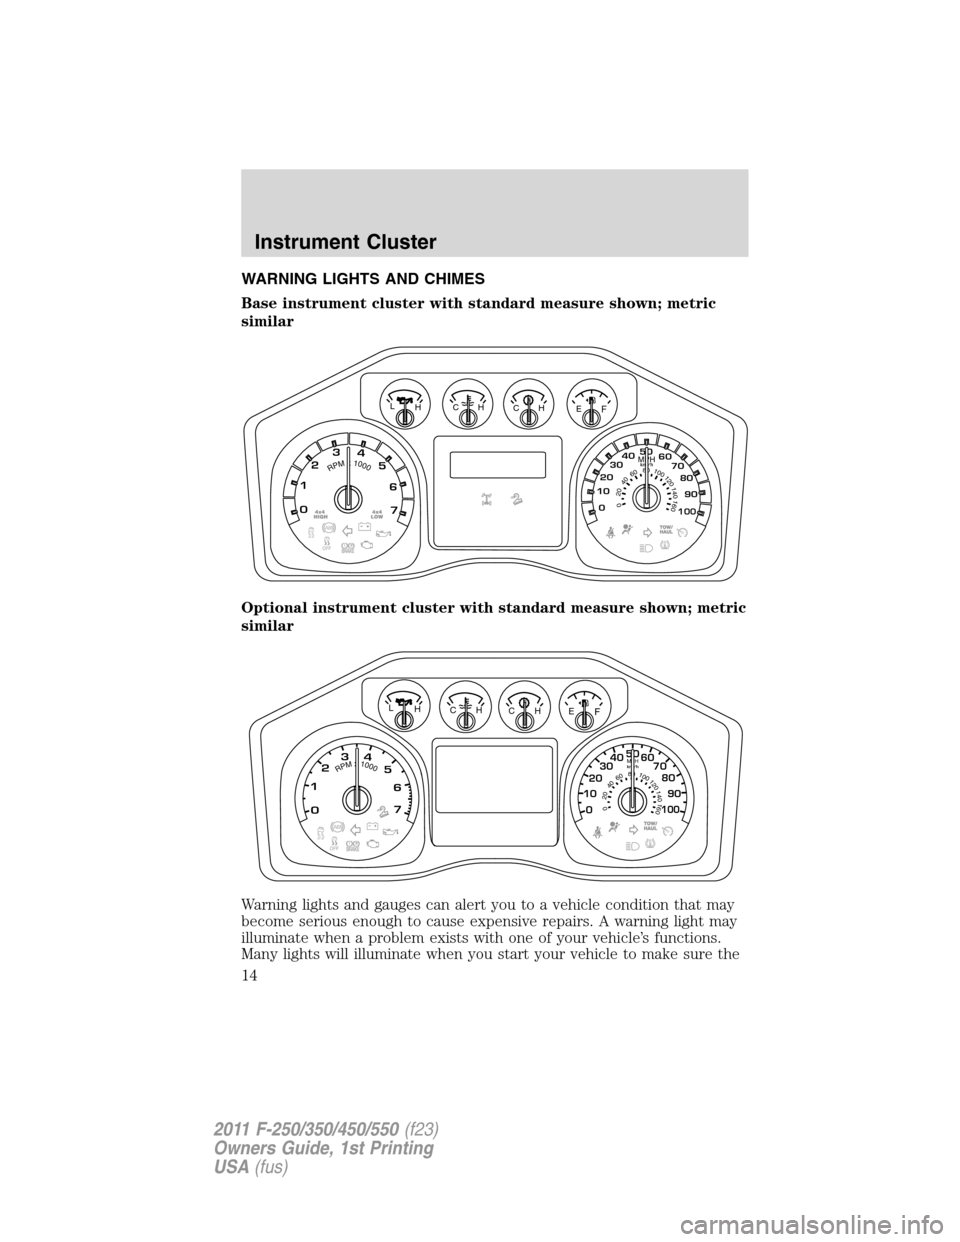 FORD SUPER DUTY 2011 3.G User Guide WARNING LIGHTS AND CHIMES
Base instrument cluster with standard measure shown; metric
similar
Optional instrument cluster with standard measure shown; metric
similar
Warning lights and gauges can aler